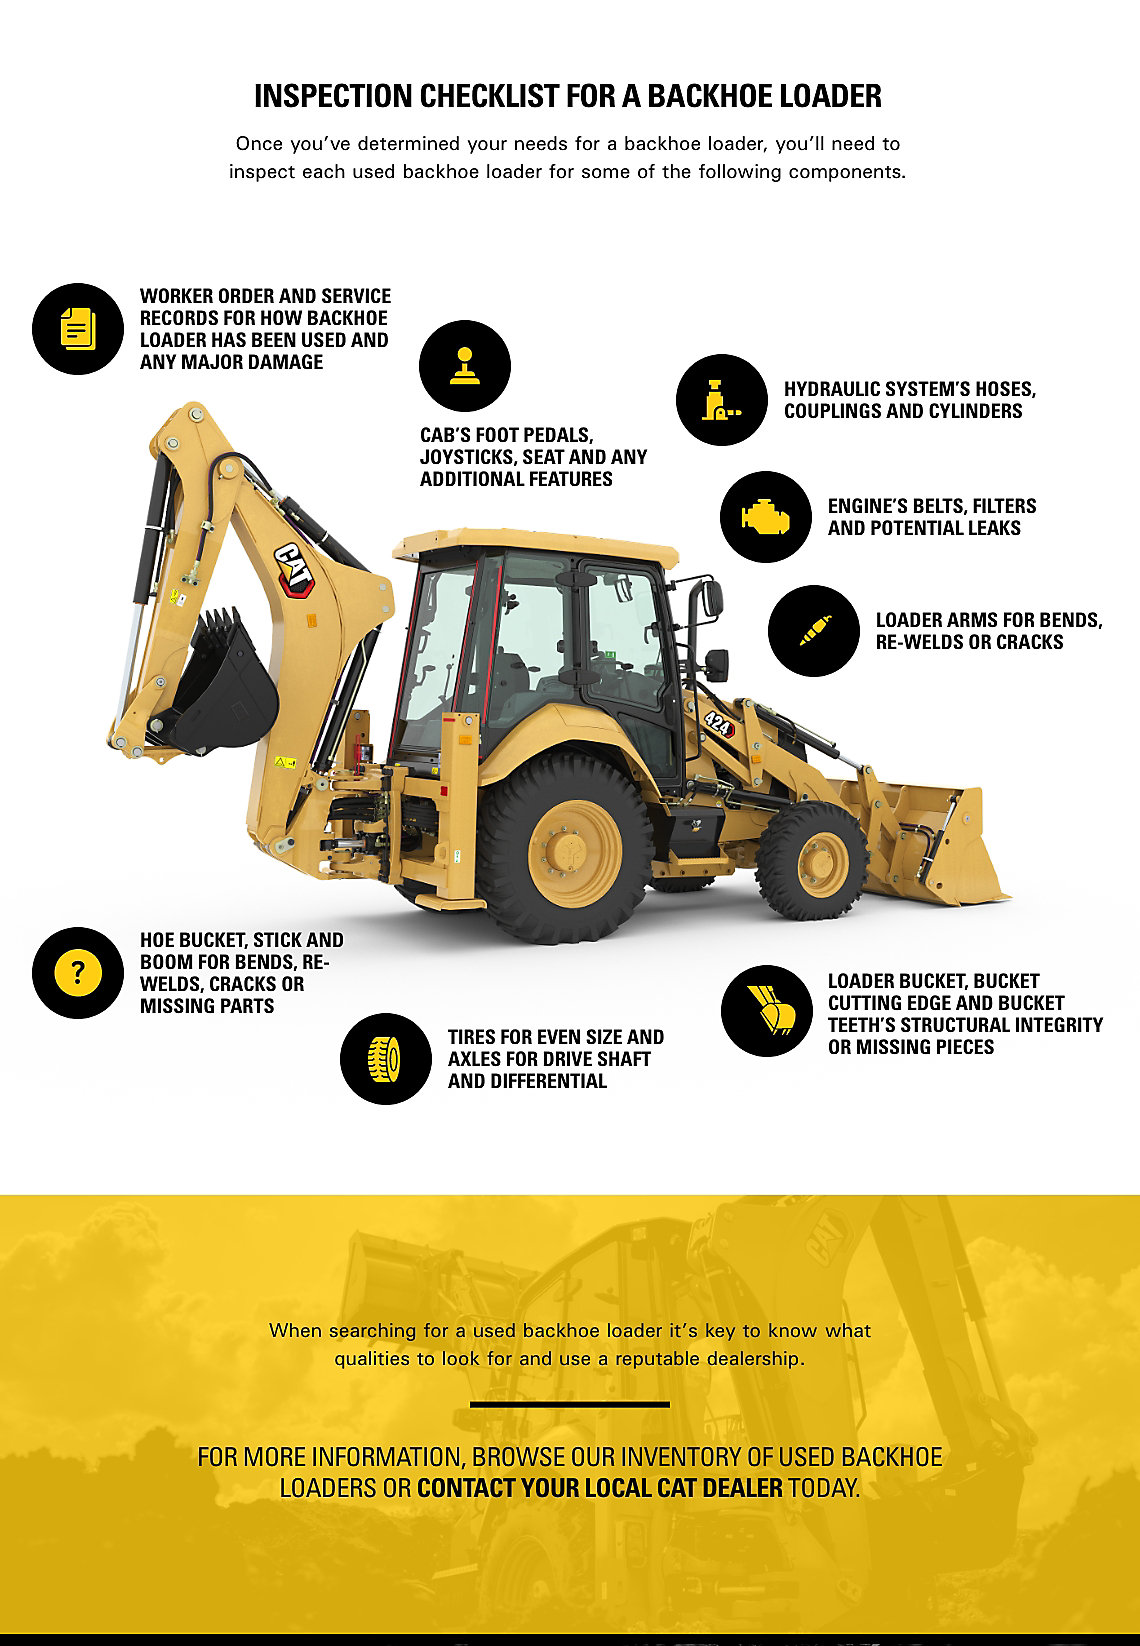 What to Look For When Buying a Used Backhoe Loader